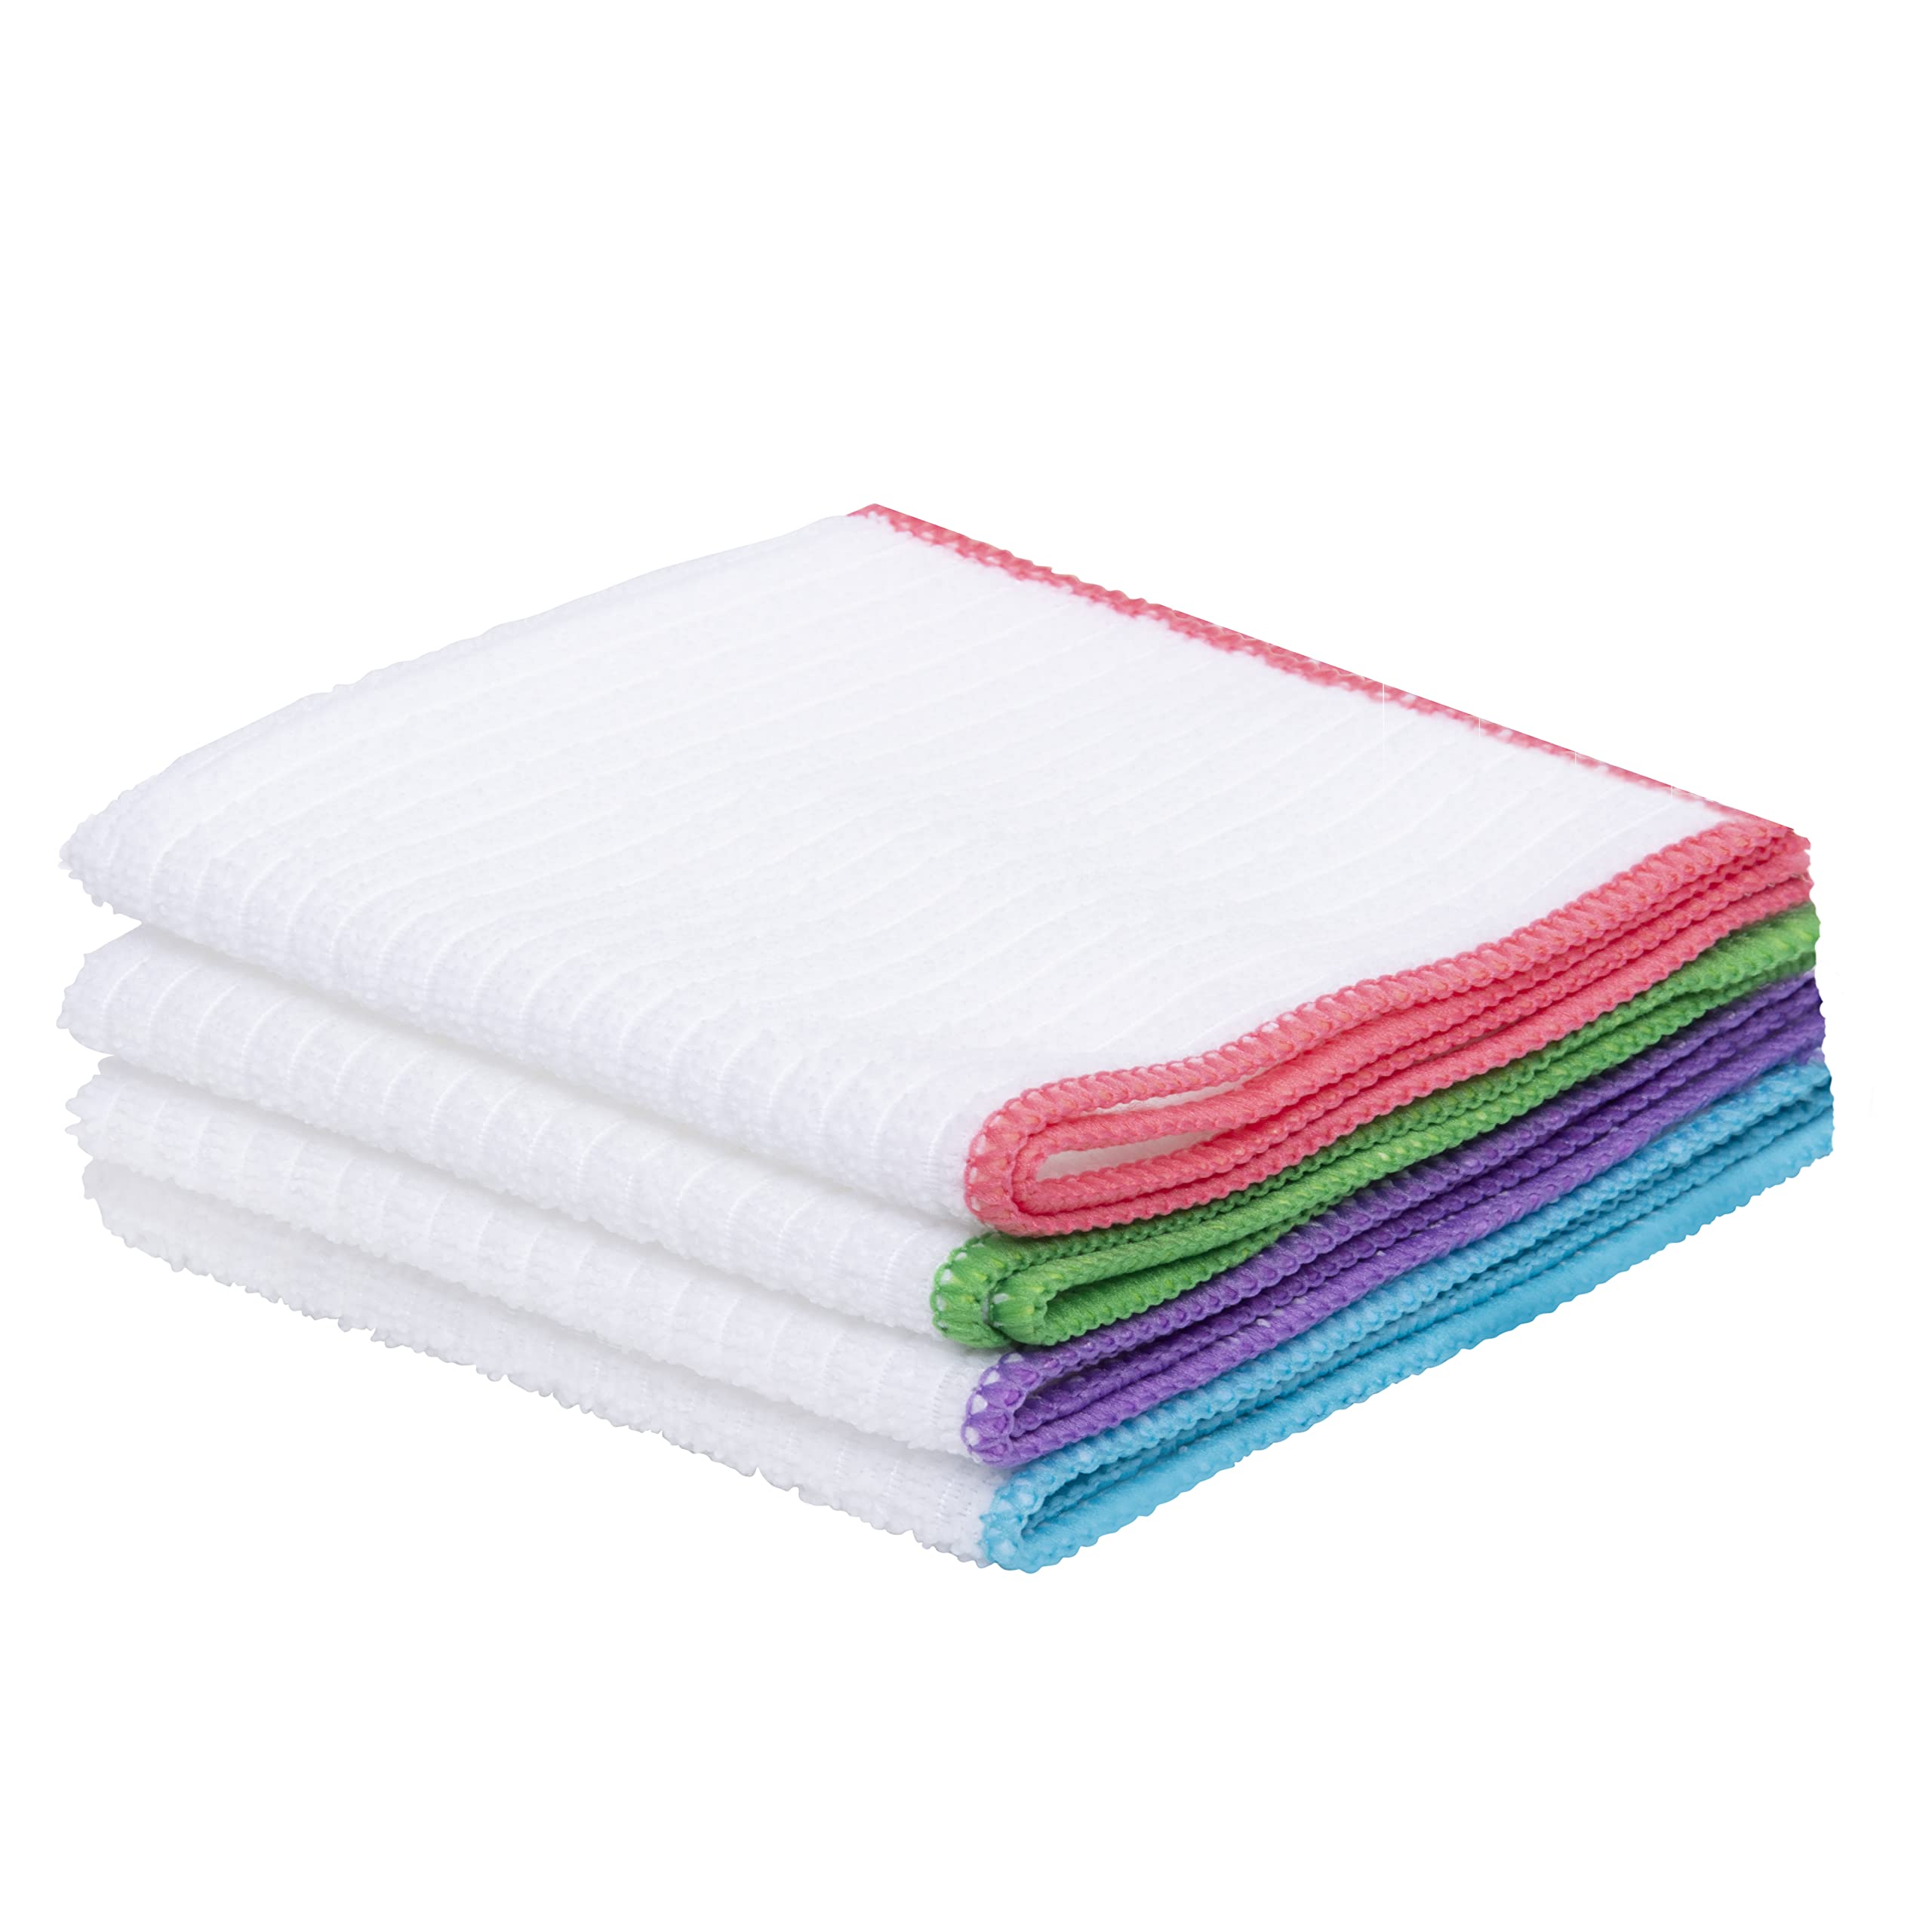 Shaylee homeware- Kitchen microfiber dish cloth for cleaning products, wash dishes, washcloth, window dusting towel for house. Kitchen rag pack of 4 lint free multipurpose towels random color clothes